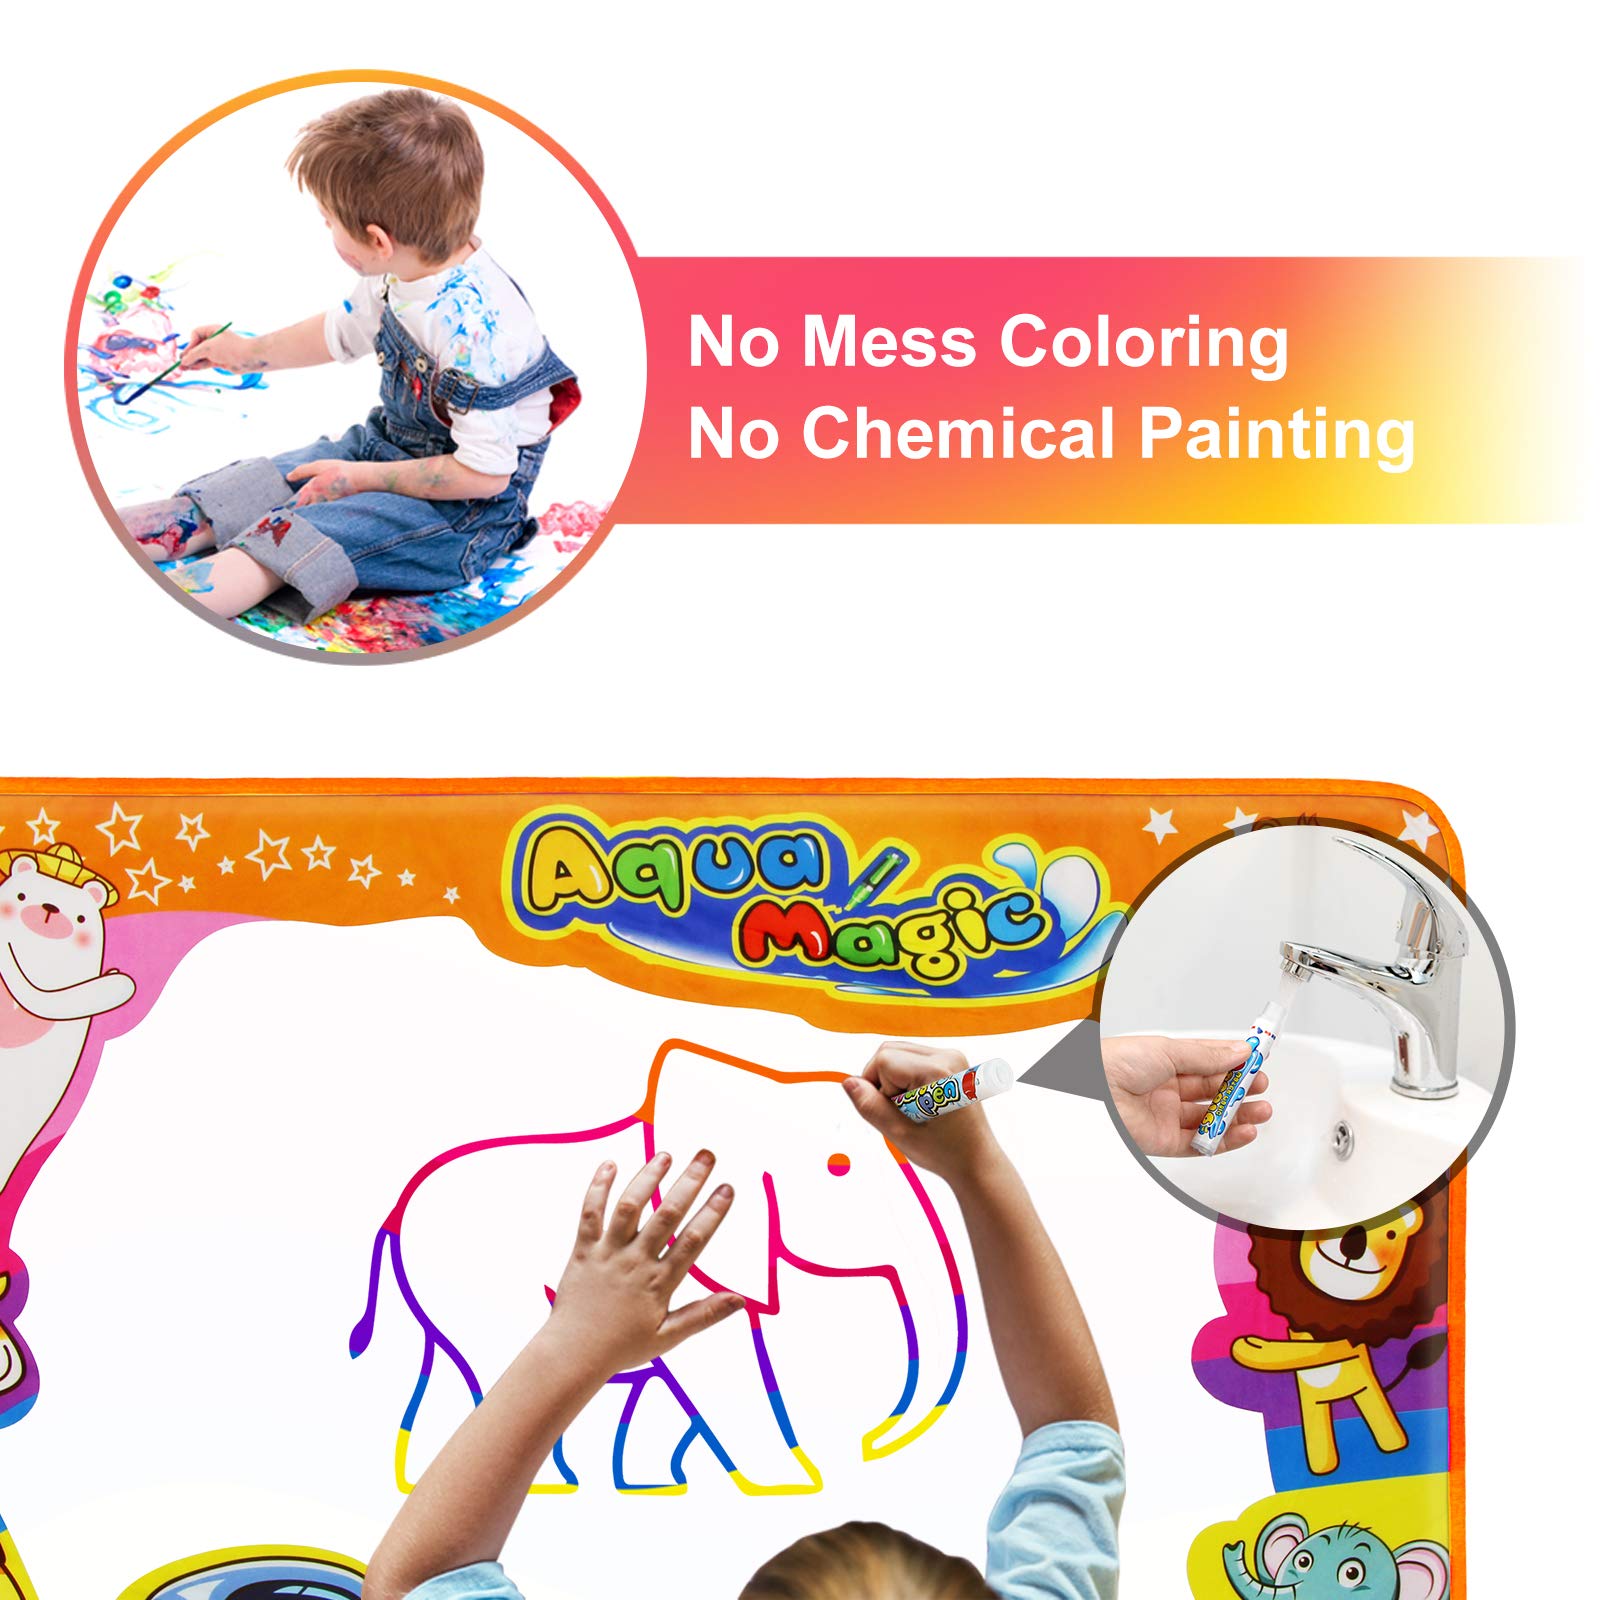 Betheaces Water Drawing Mat Aqua Magic Doodle Kids Toys Mess Free Coloring Painting Educational Writing Mats Xmas Gift for Toddlers Boys Girls Age of 3,4,5,6,7 Year Old 34.5" X 22.5" in 6 Colors